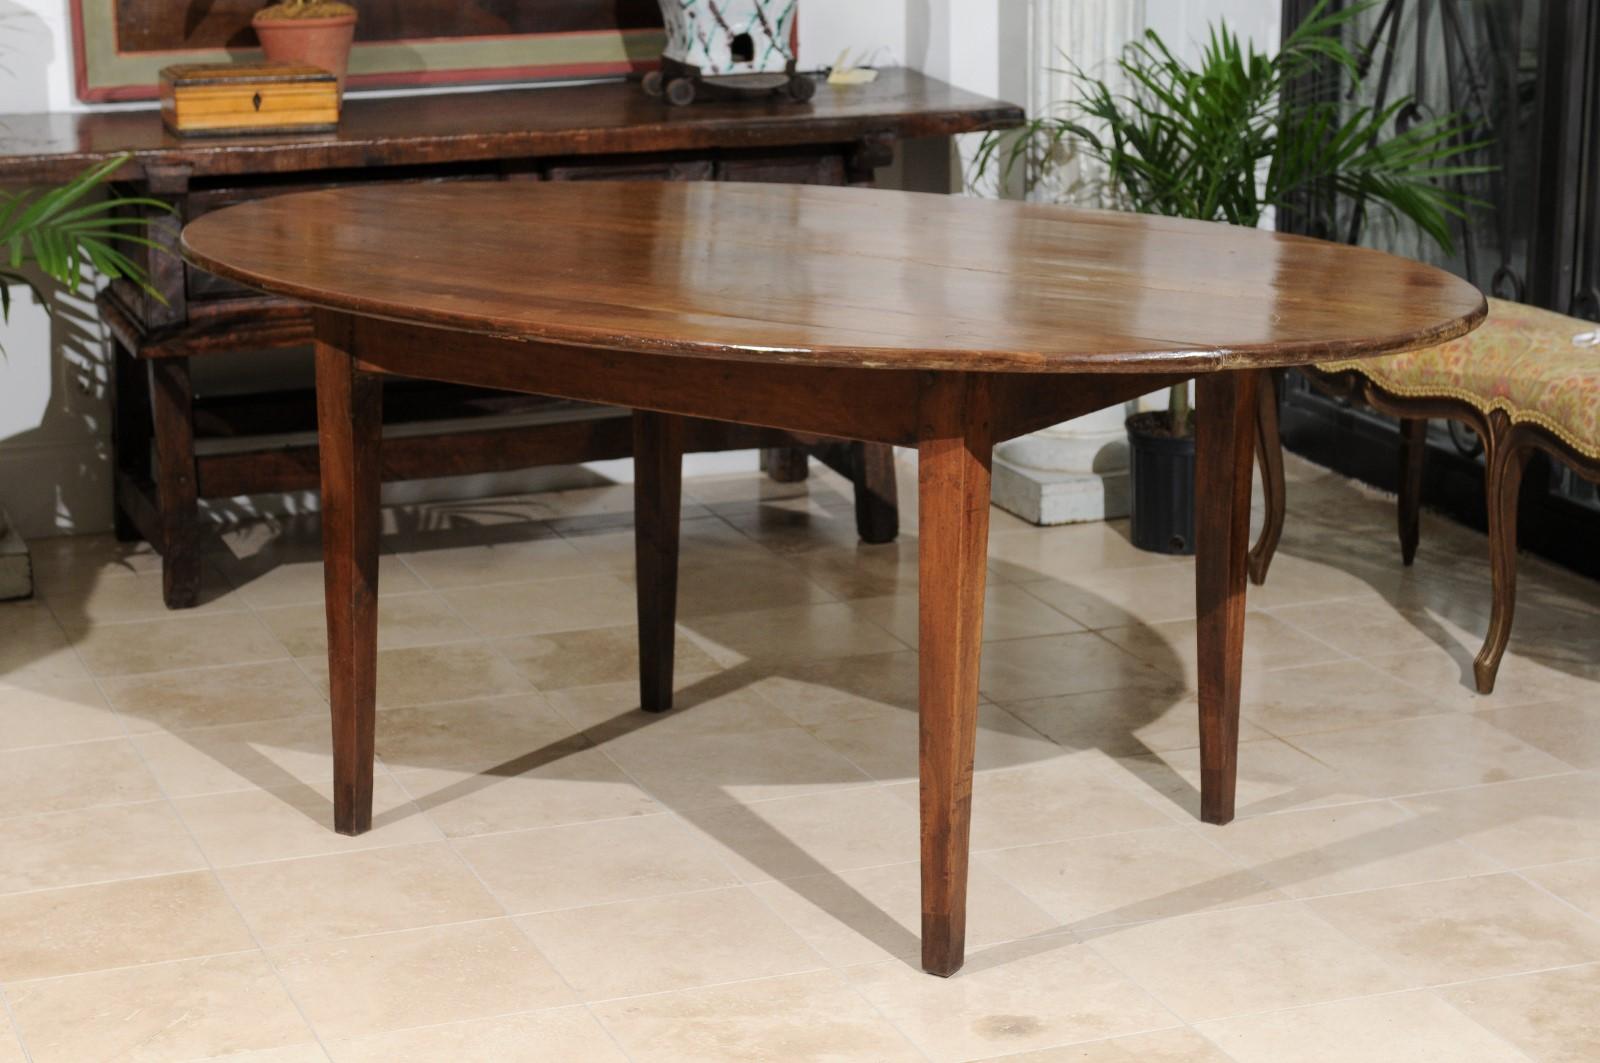  French Oval Farm Table with Tapered Legs 4